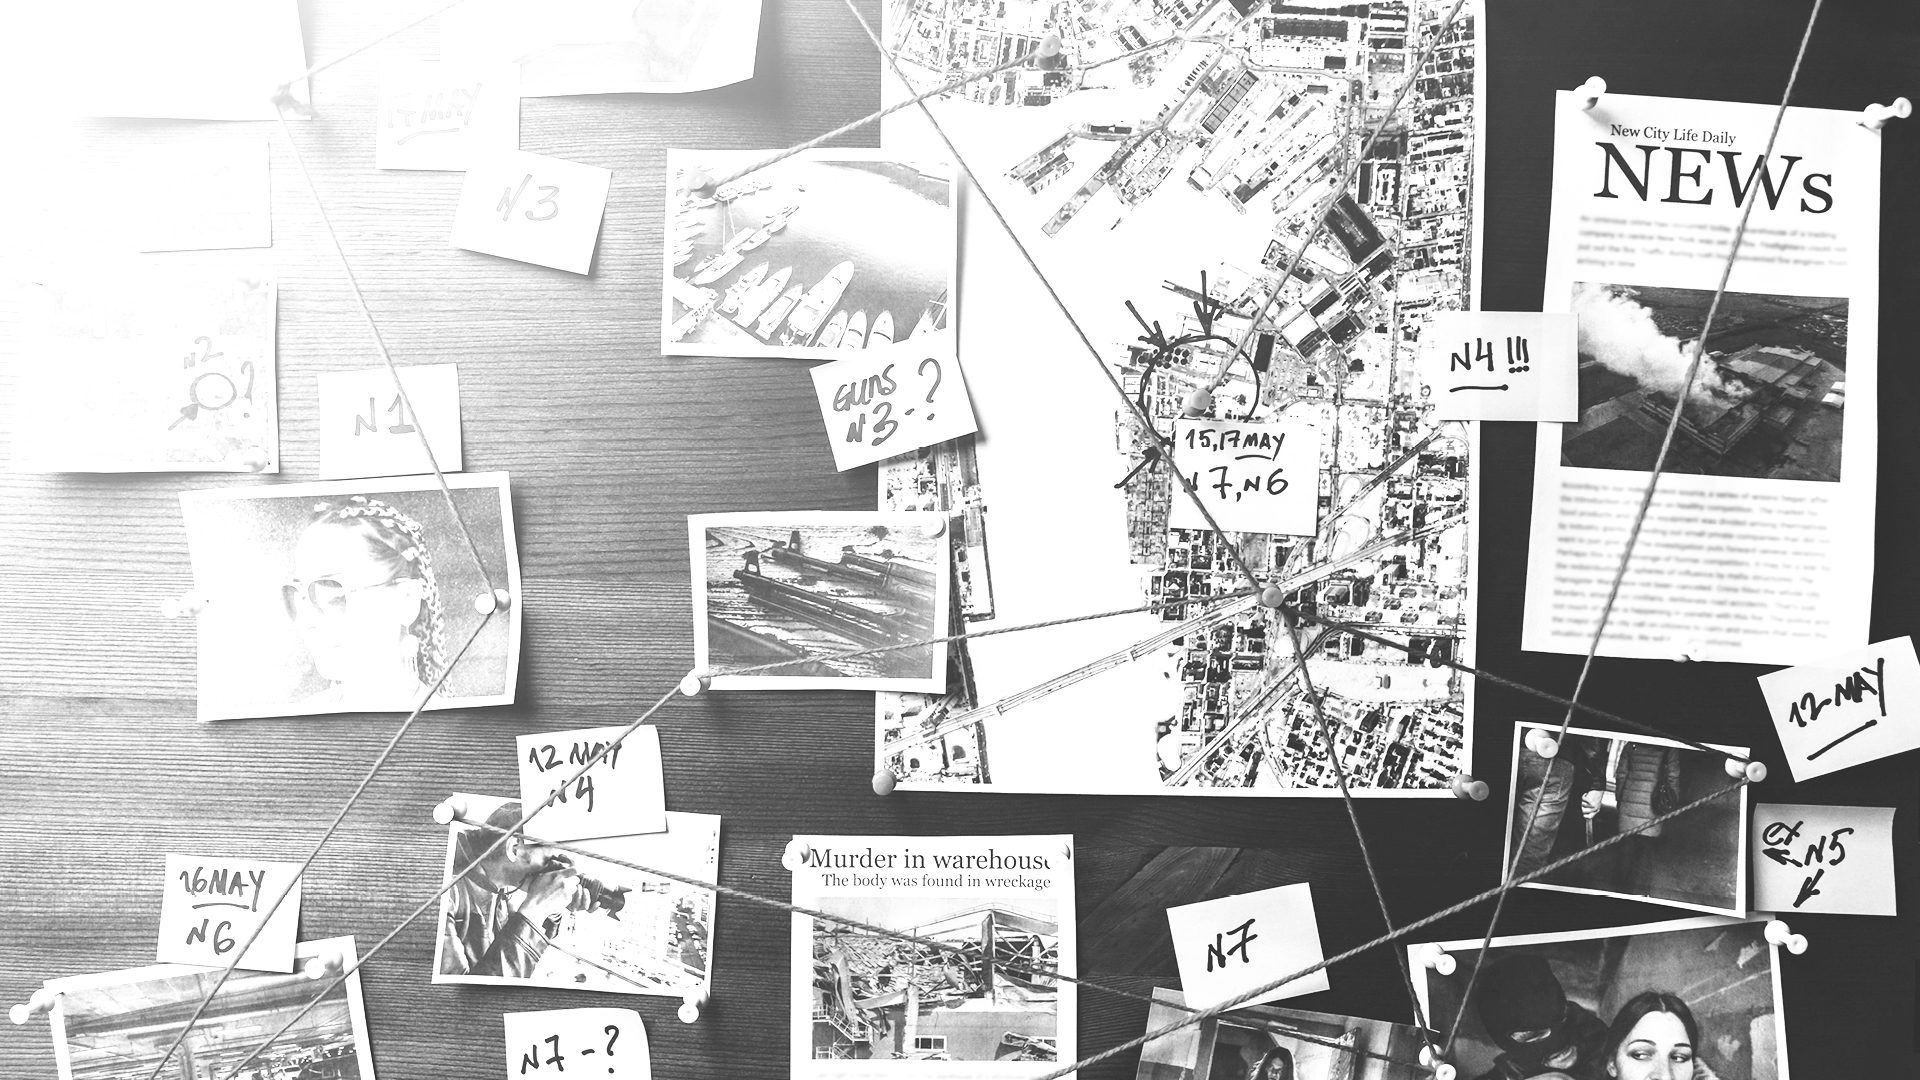 Image of a cork board with various images, sticky notes and articles on it and connected by strings.